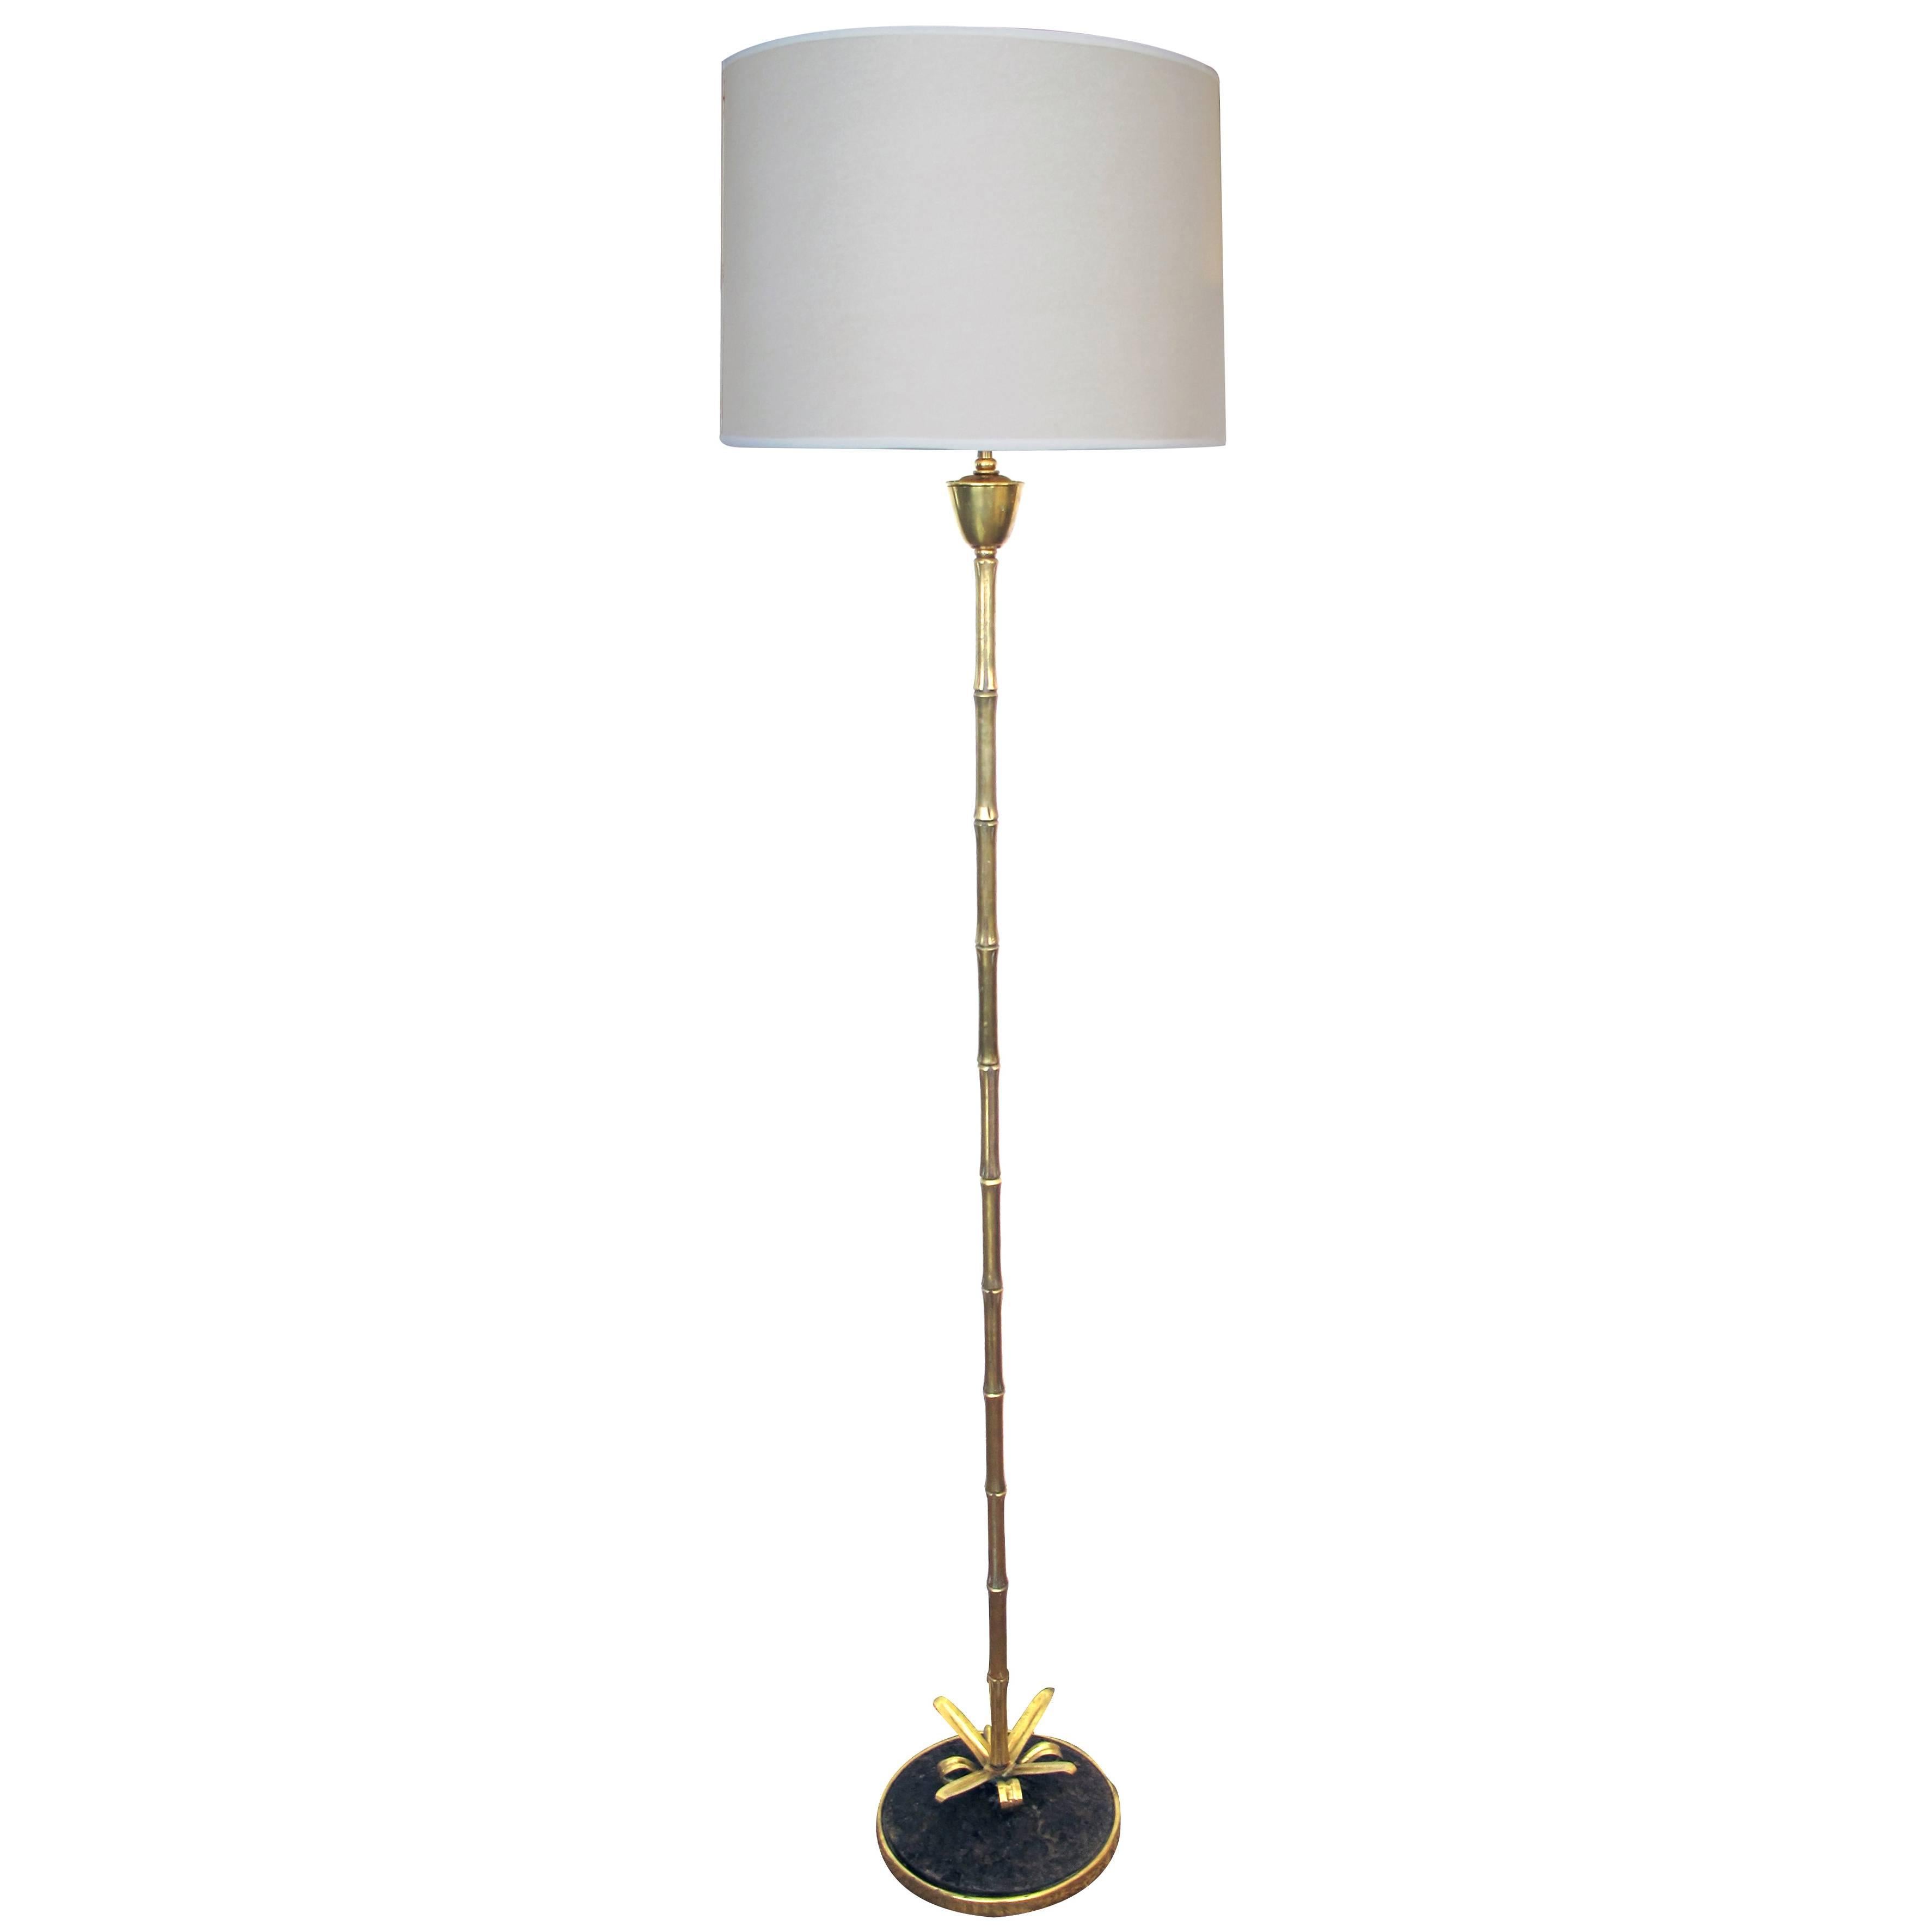 Elegant French Maison Baguès 1960s Brass Faux Bamboo Floor Lamp For Sale